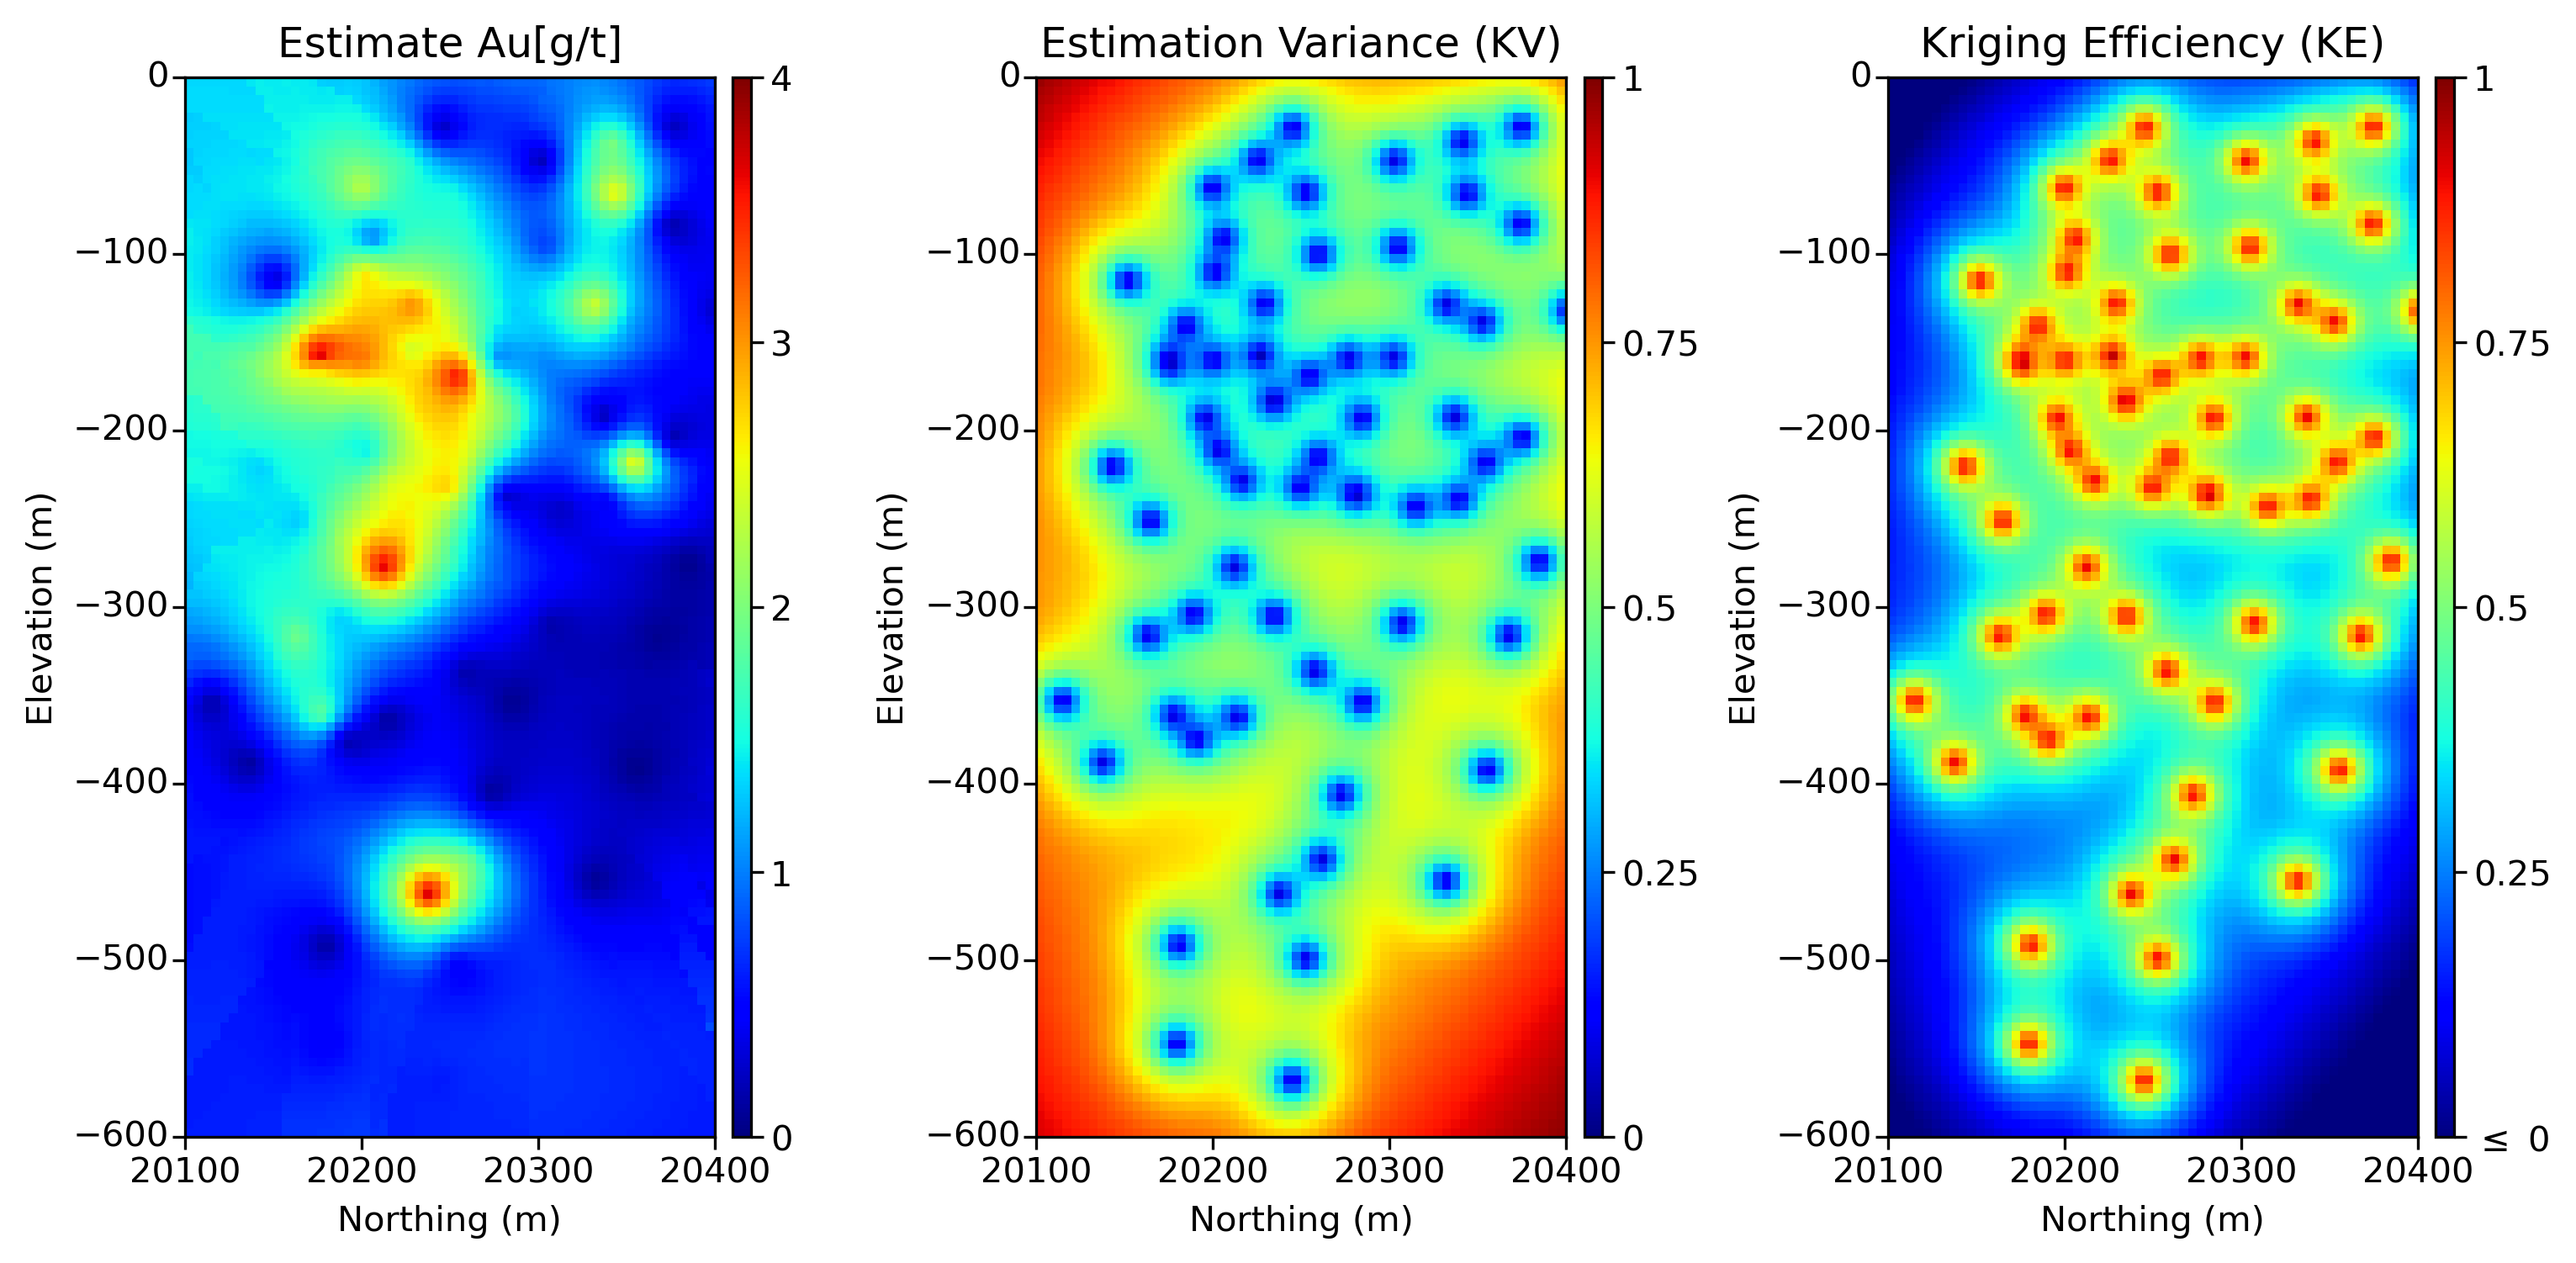 Figure 2: From left to right. Estimation map using OK, Estimation Variance (KV) map, and Kriging Efficiency (KE) map.